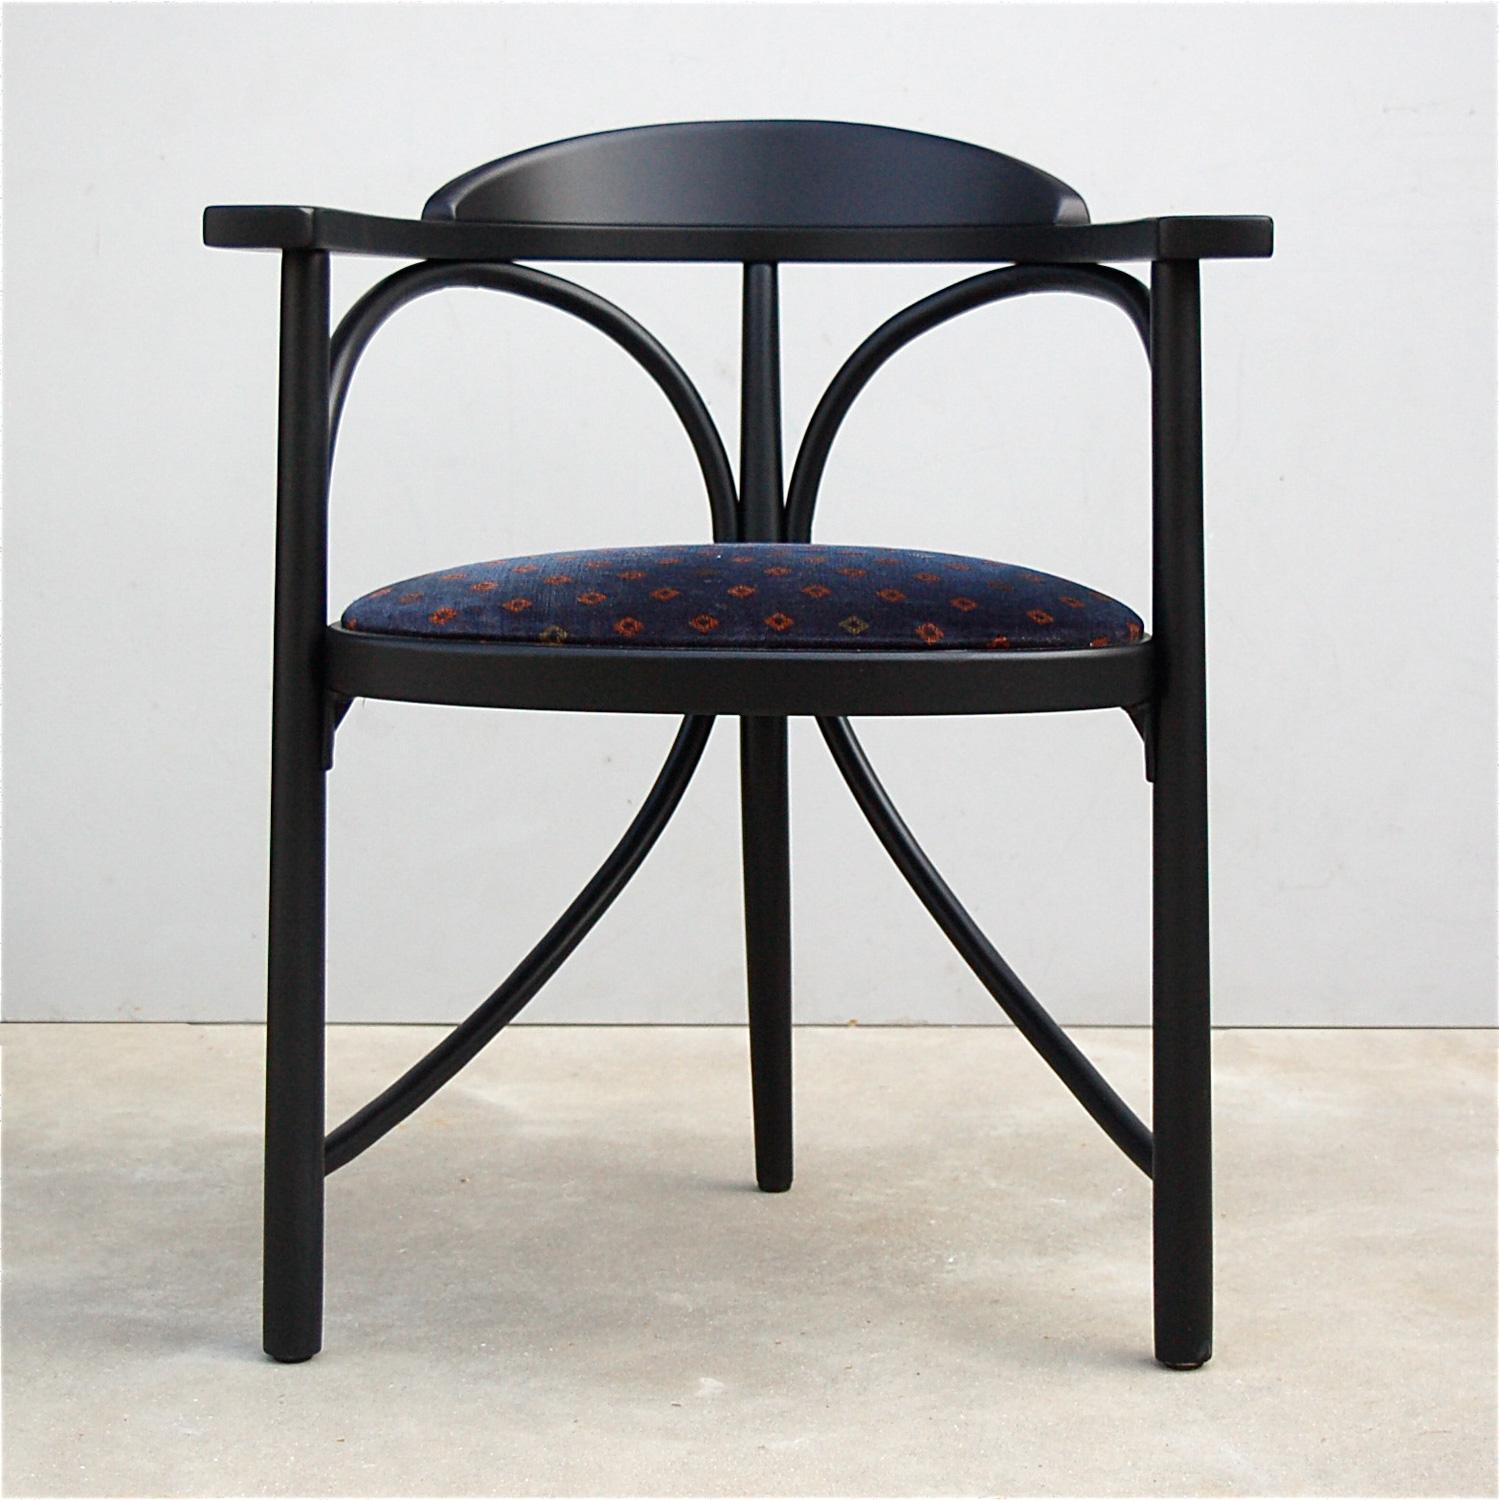 A total of eight Thonet Model No. 81 tripod bentwood armchairs.. Art Nouveau style dining chair, originally designed in 1904. The black lacquered model we have on offer is a re-edition from the 1980s. The upholstery also dates from that time. The